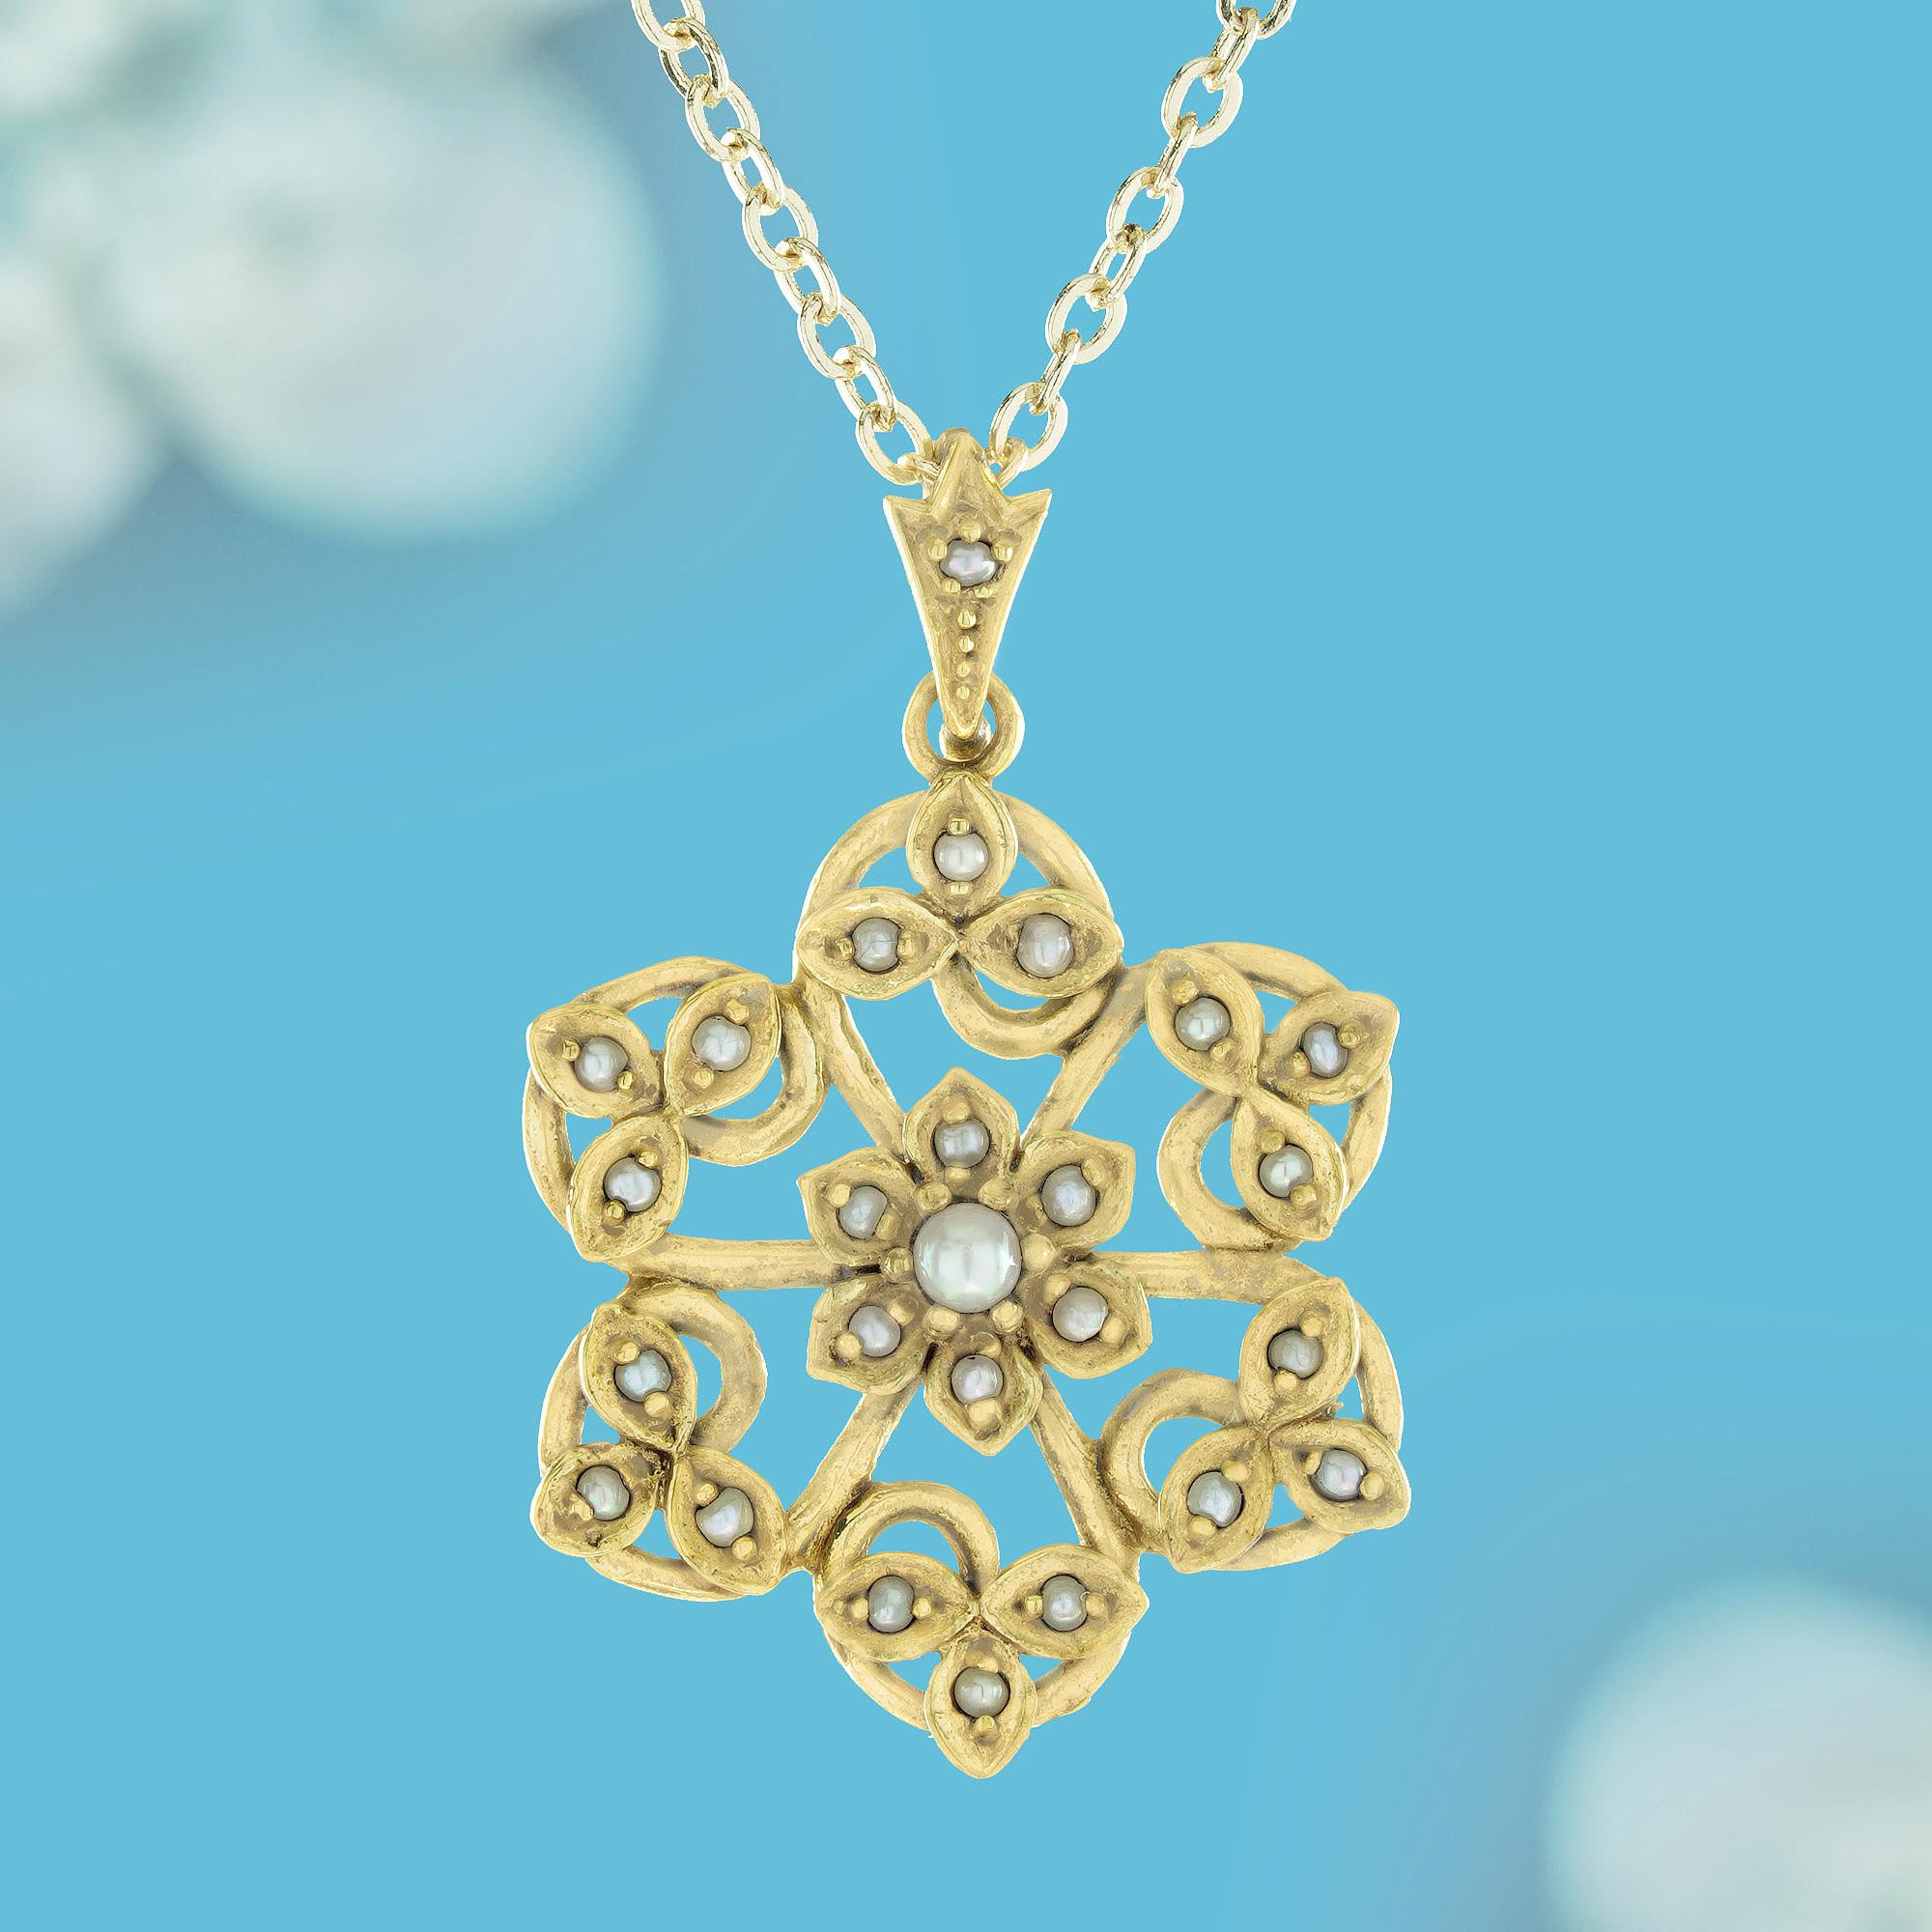 Crafted from yellow gold, this elegant vintage-style floral pendant evokes sophistication with its intricate swirling loops and curves reminiscent of blooming flowers. At its center lies a round white pearl, resembling the delicate pollen of a